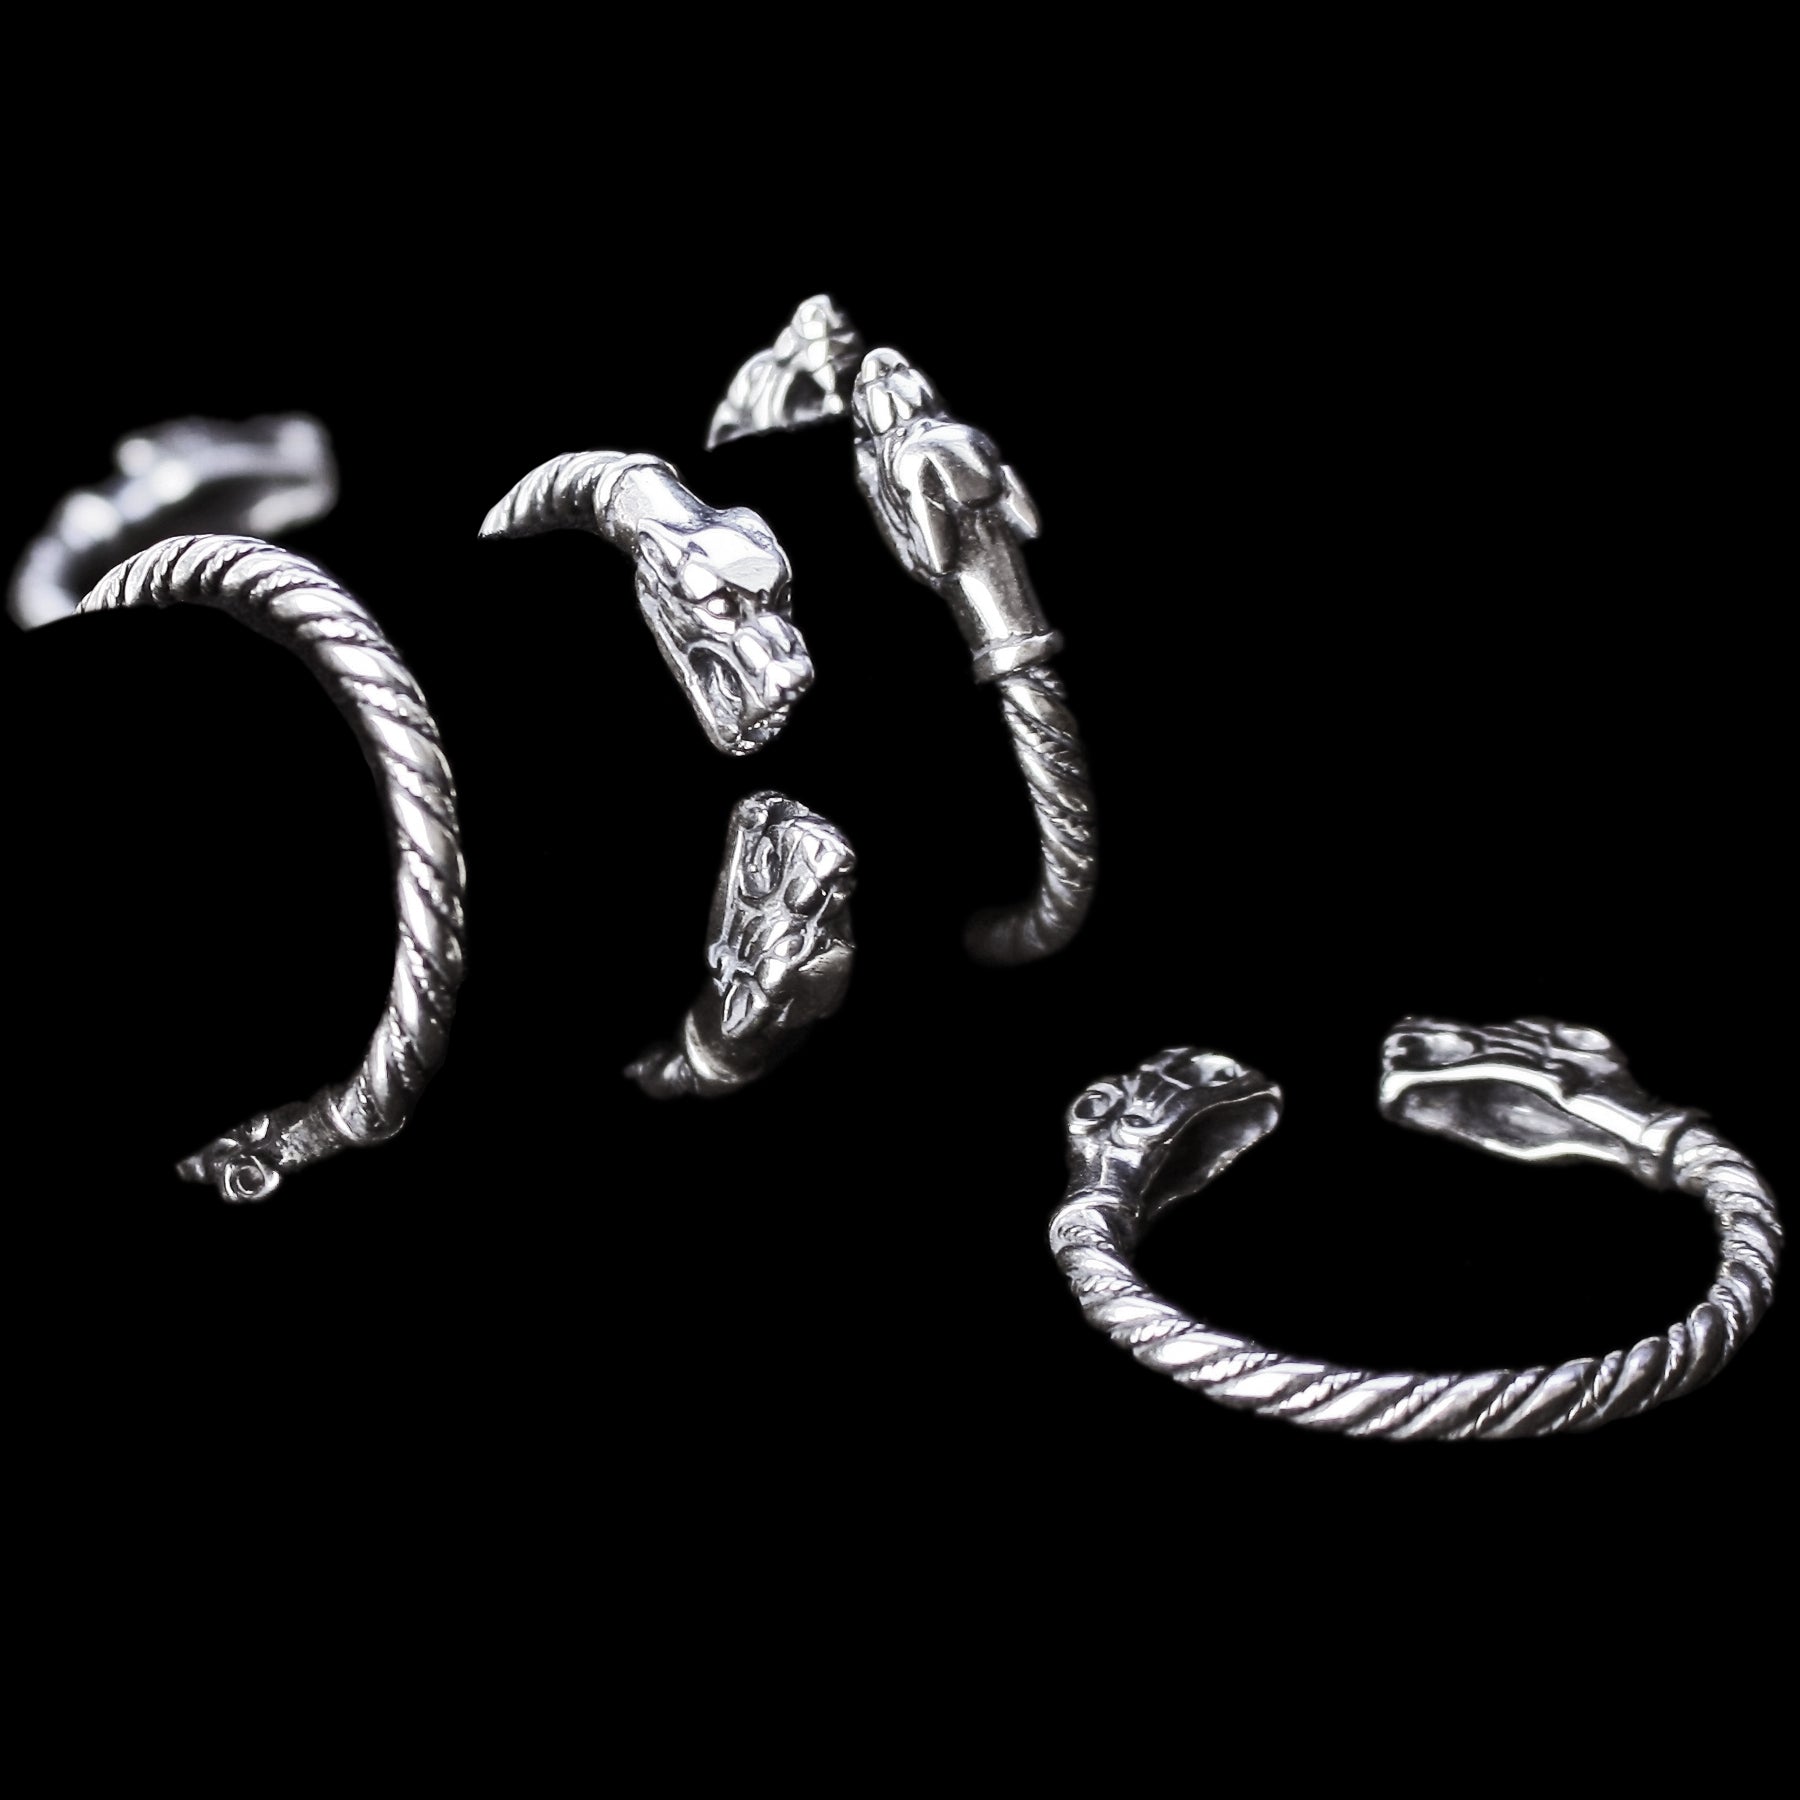 Silver Twisted Ferocious Wolves Ring - Viking Jewelry